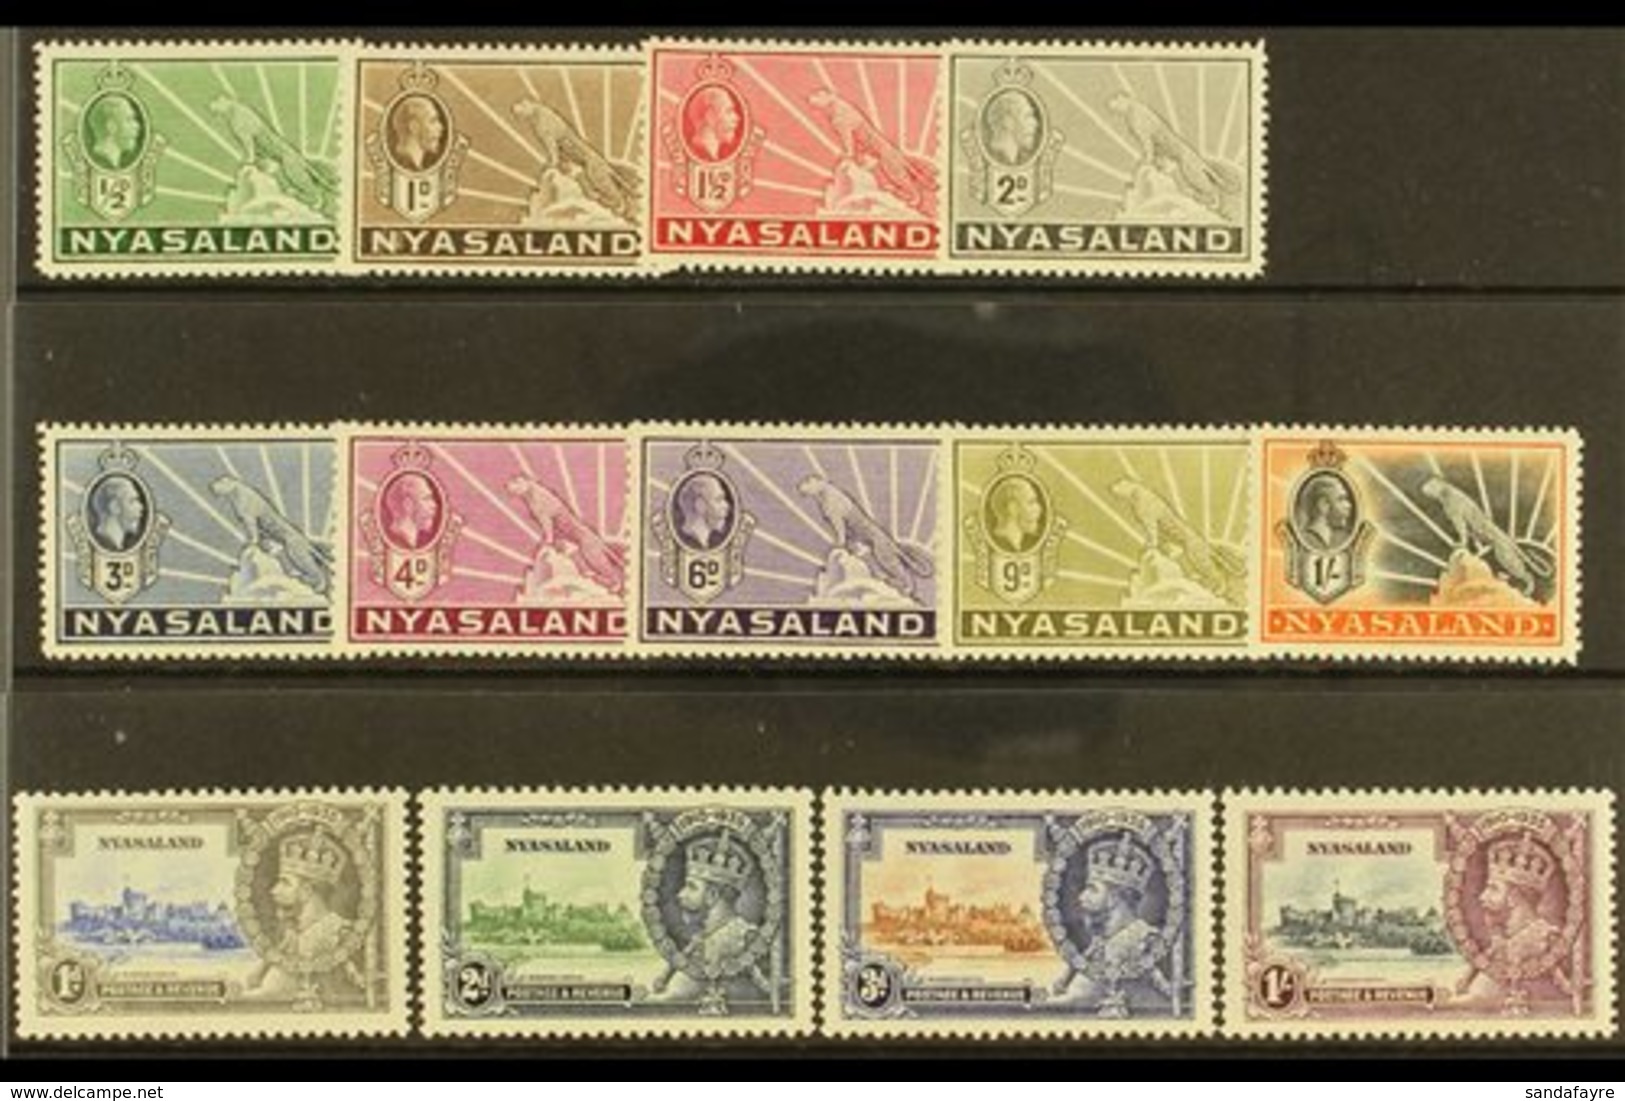 1934-35  KGV VERY FINE MINT  "Symbol Of The Protectorate" & " Silver Jubilee" Sets, SG 114/26, VFM (13 Stamps) For More  - Nyassaland (1907-1953)